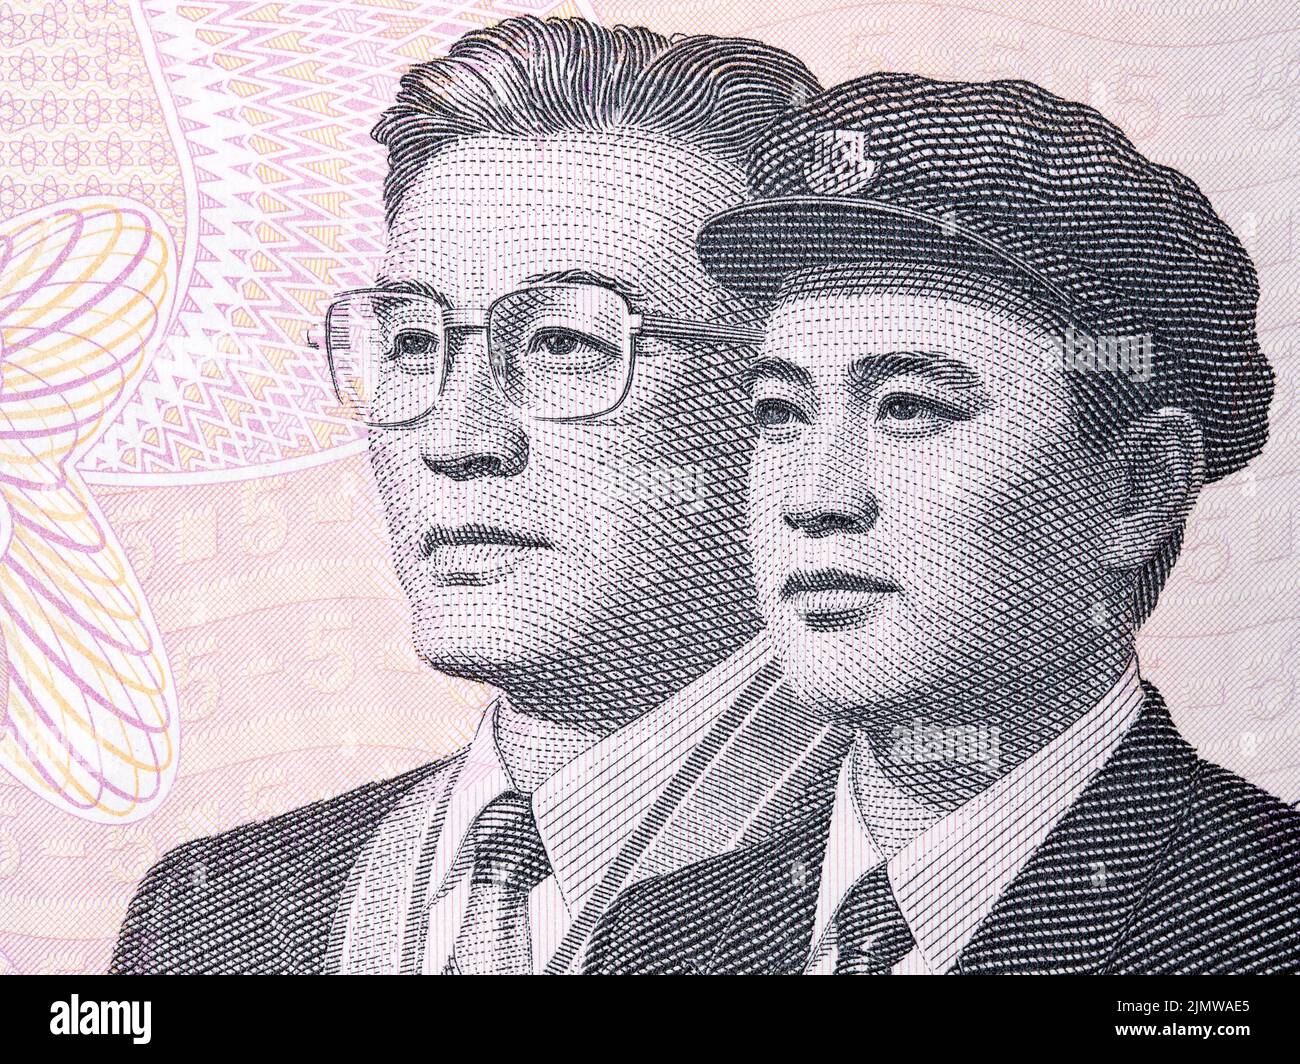 Two Koreans, a portrait from North Korean money Stock Photo